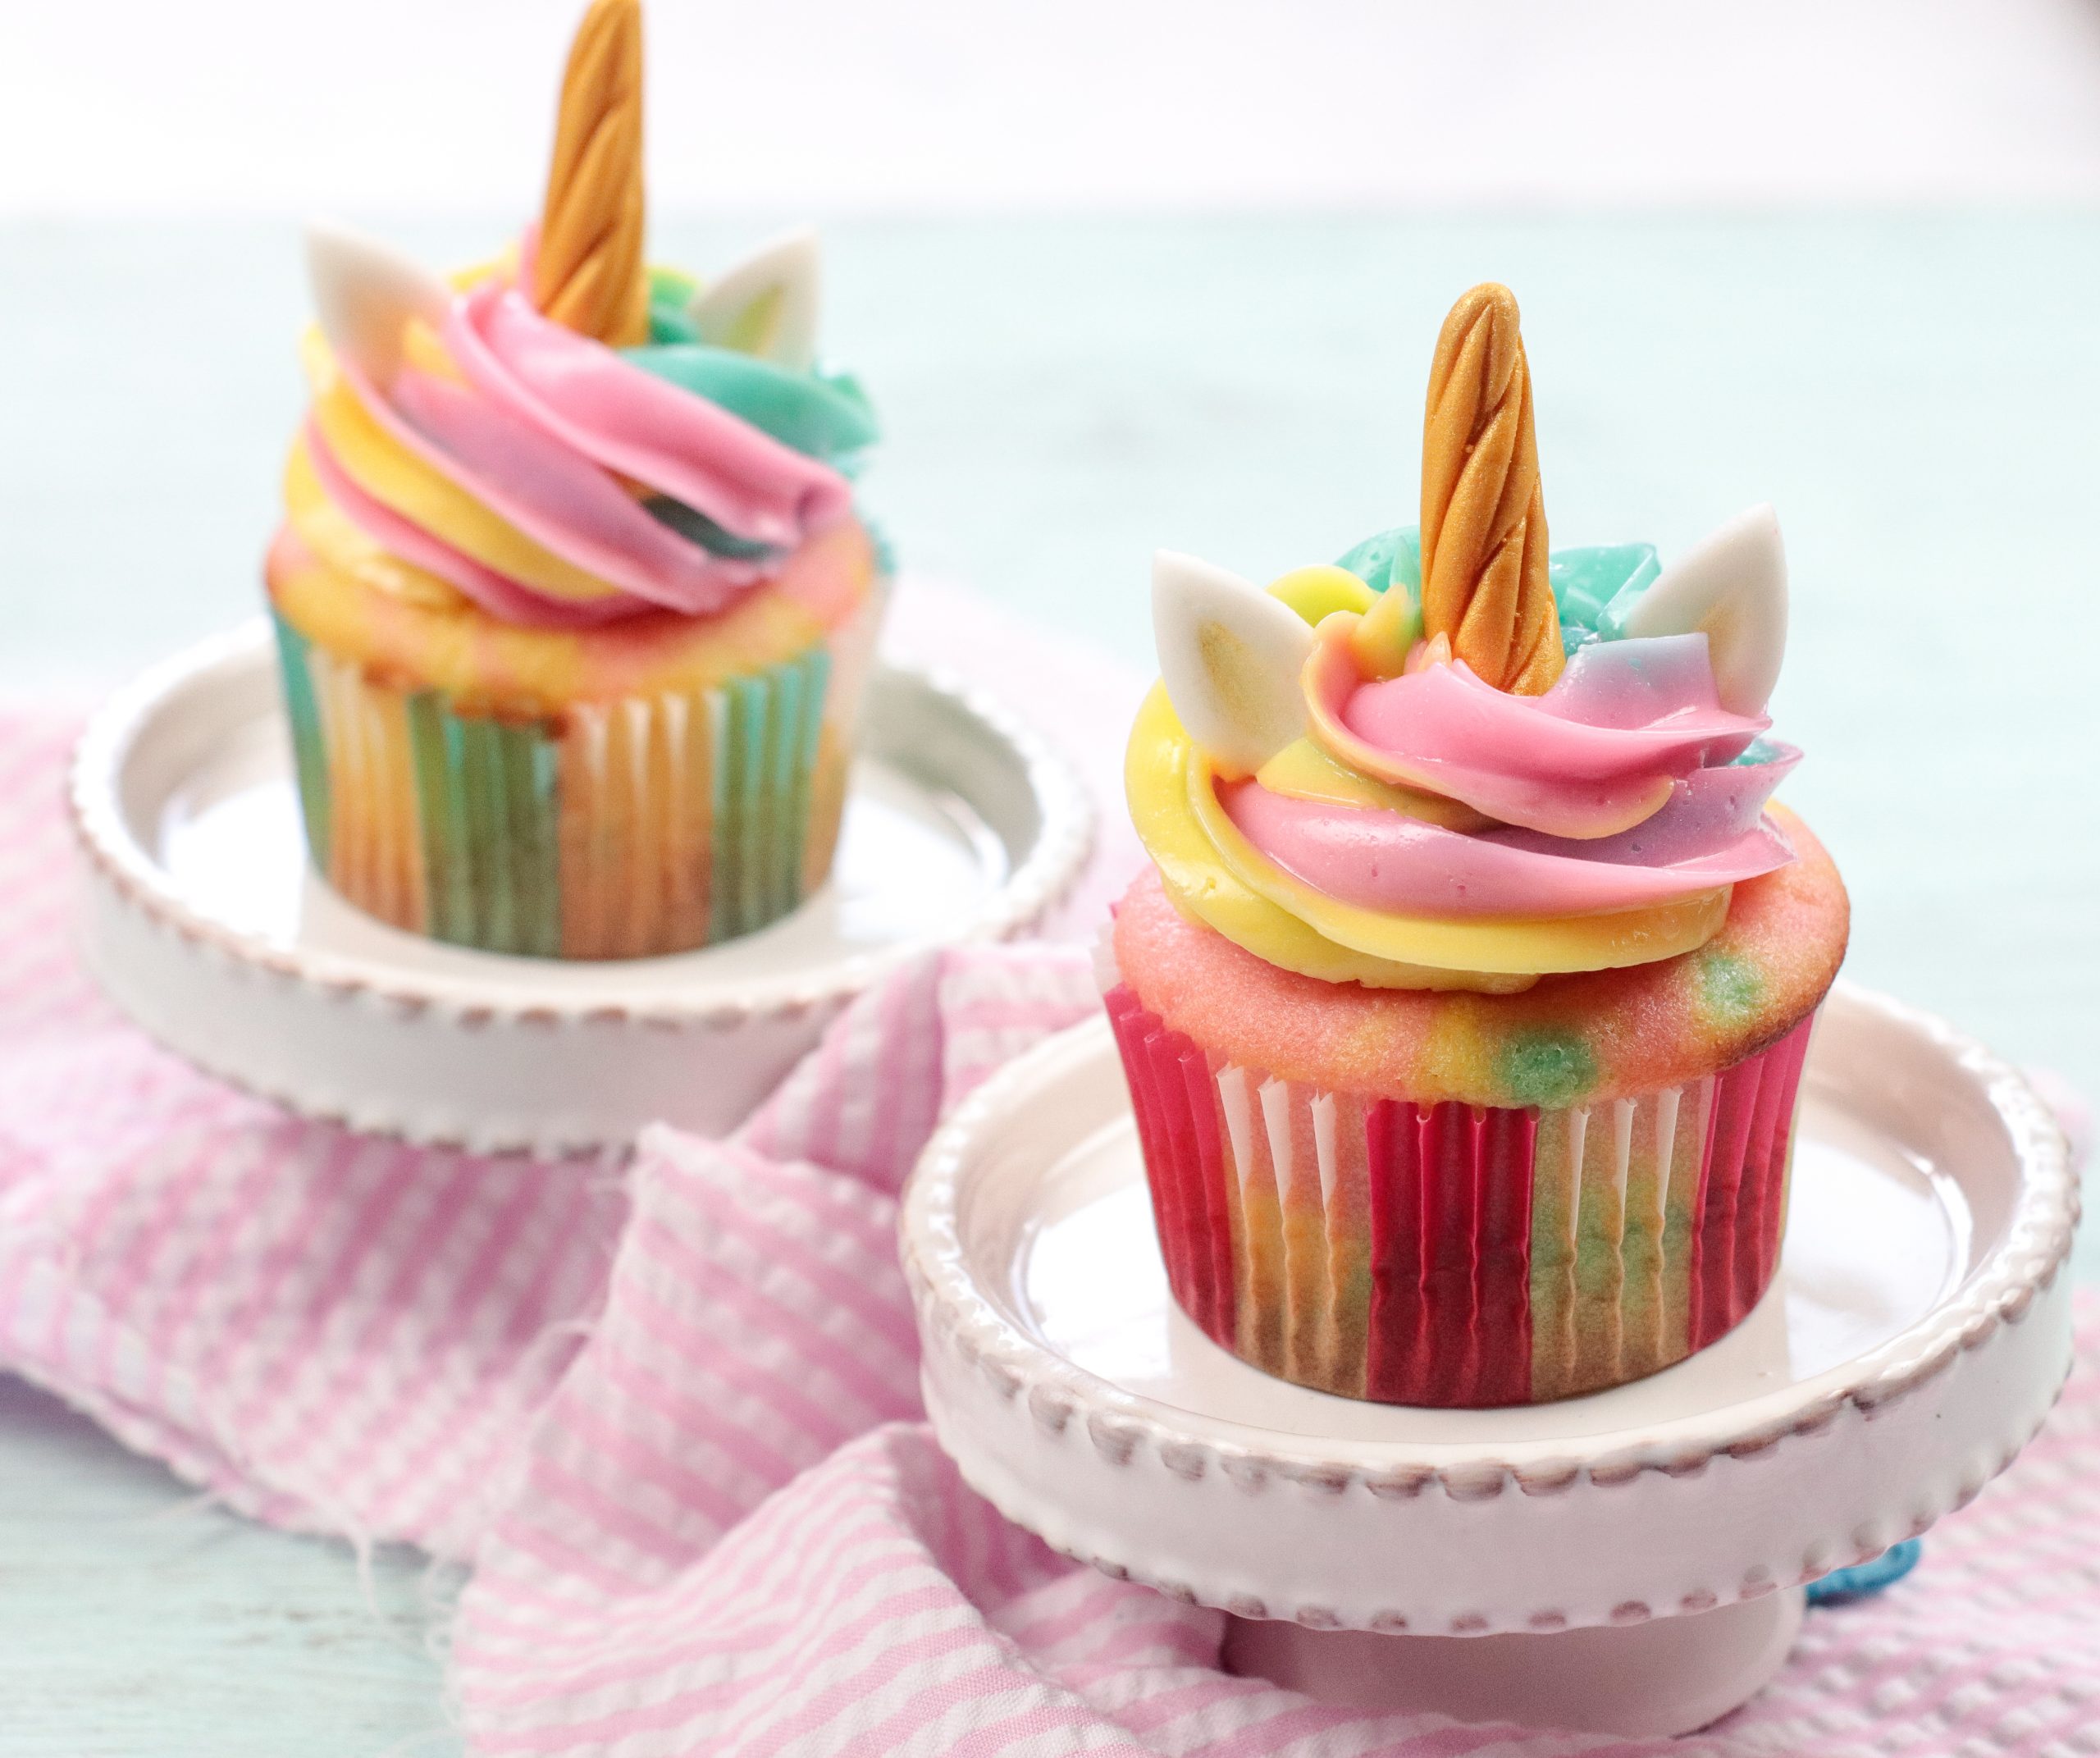 These Unicorn Cupcakes Are the Most Magical Dessert Ever - Our WabiSabi